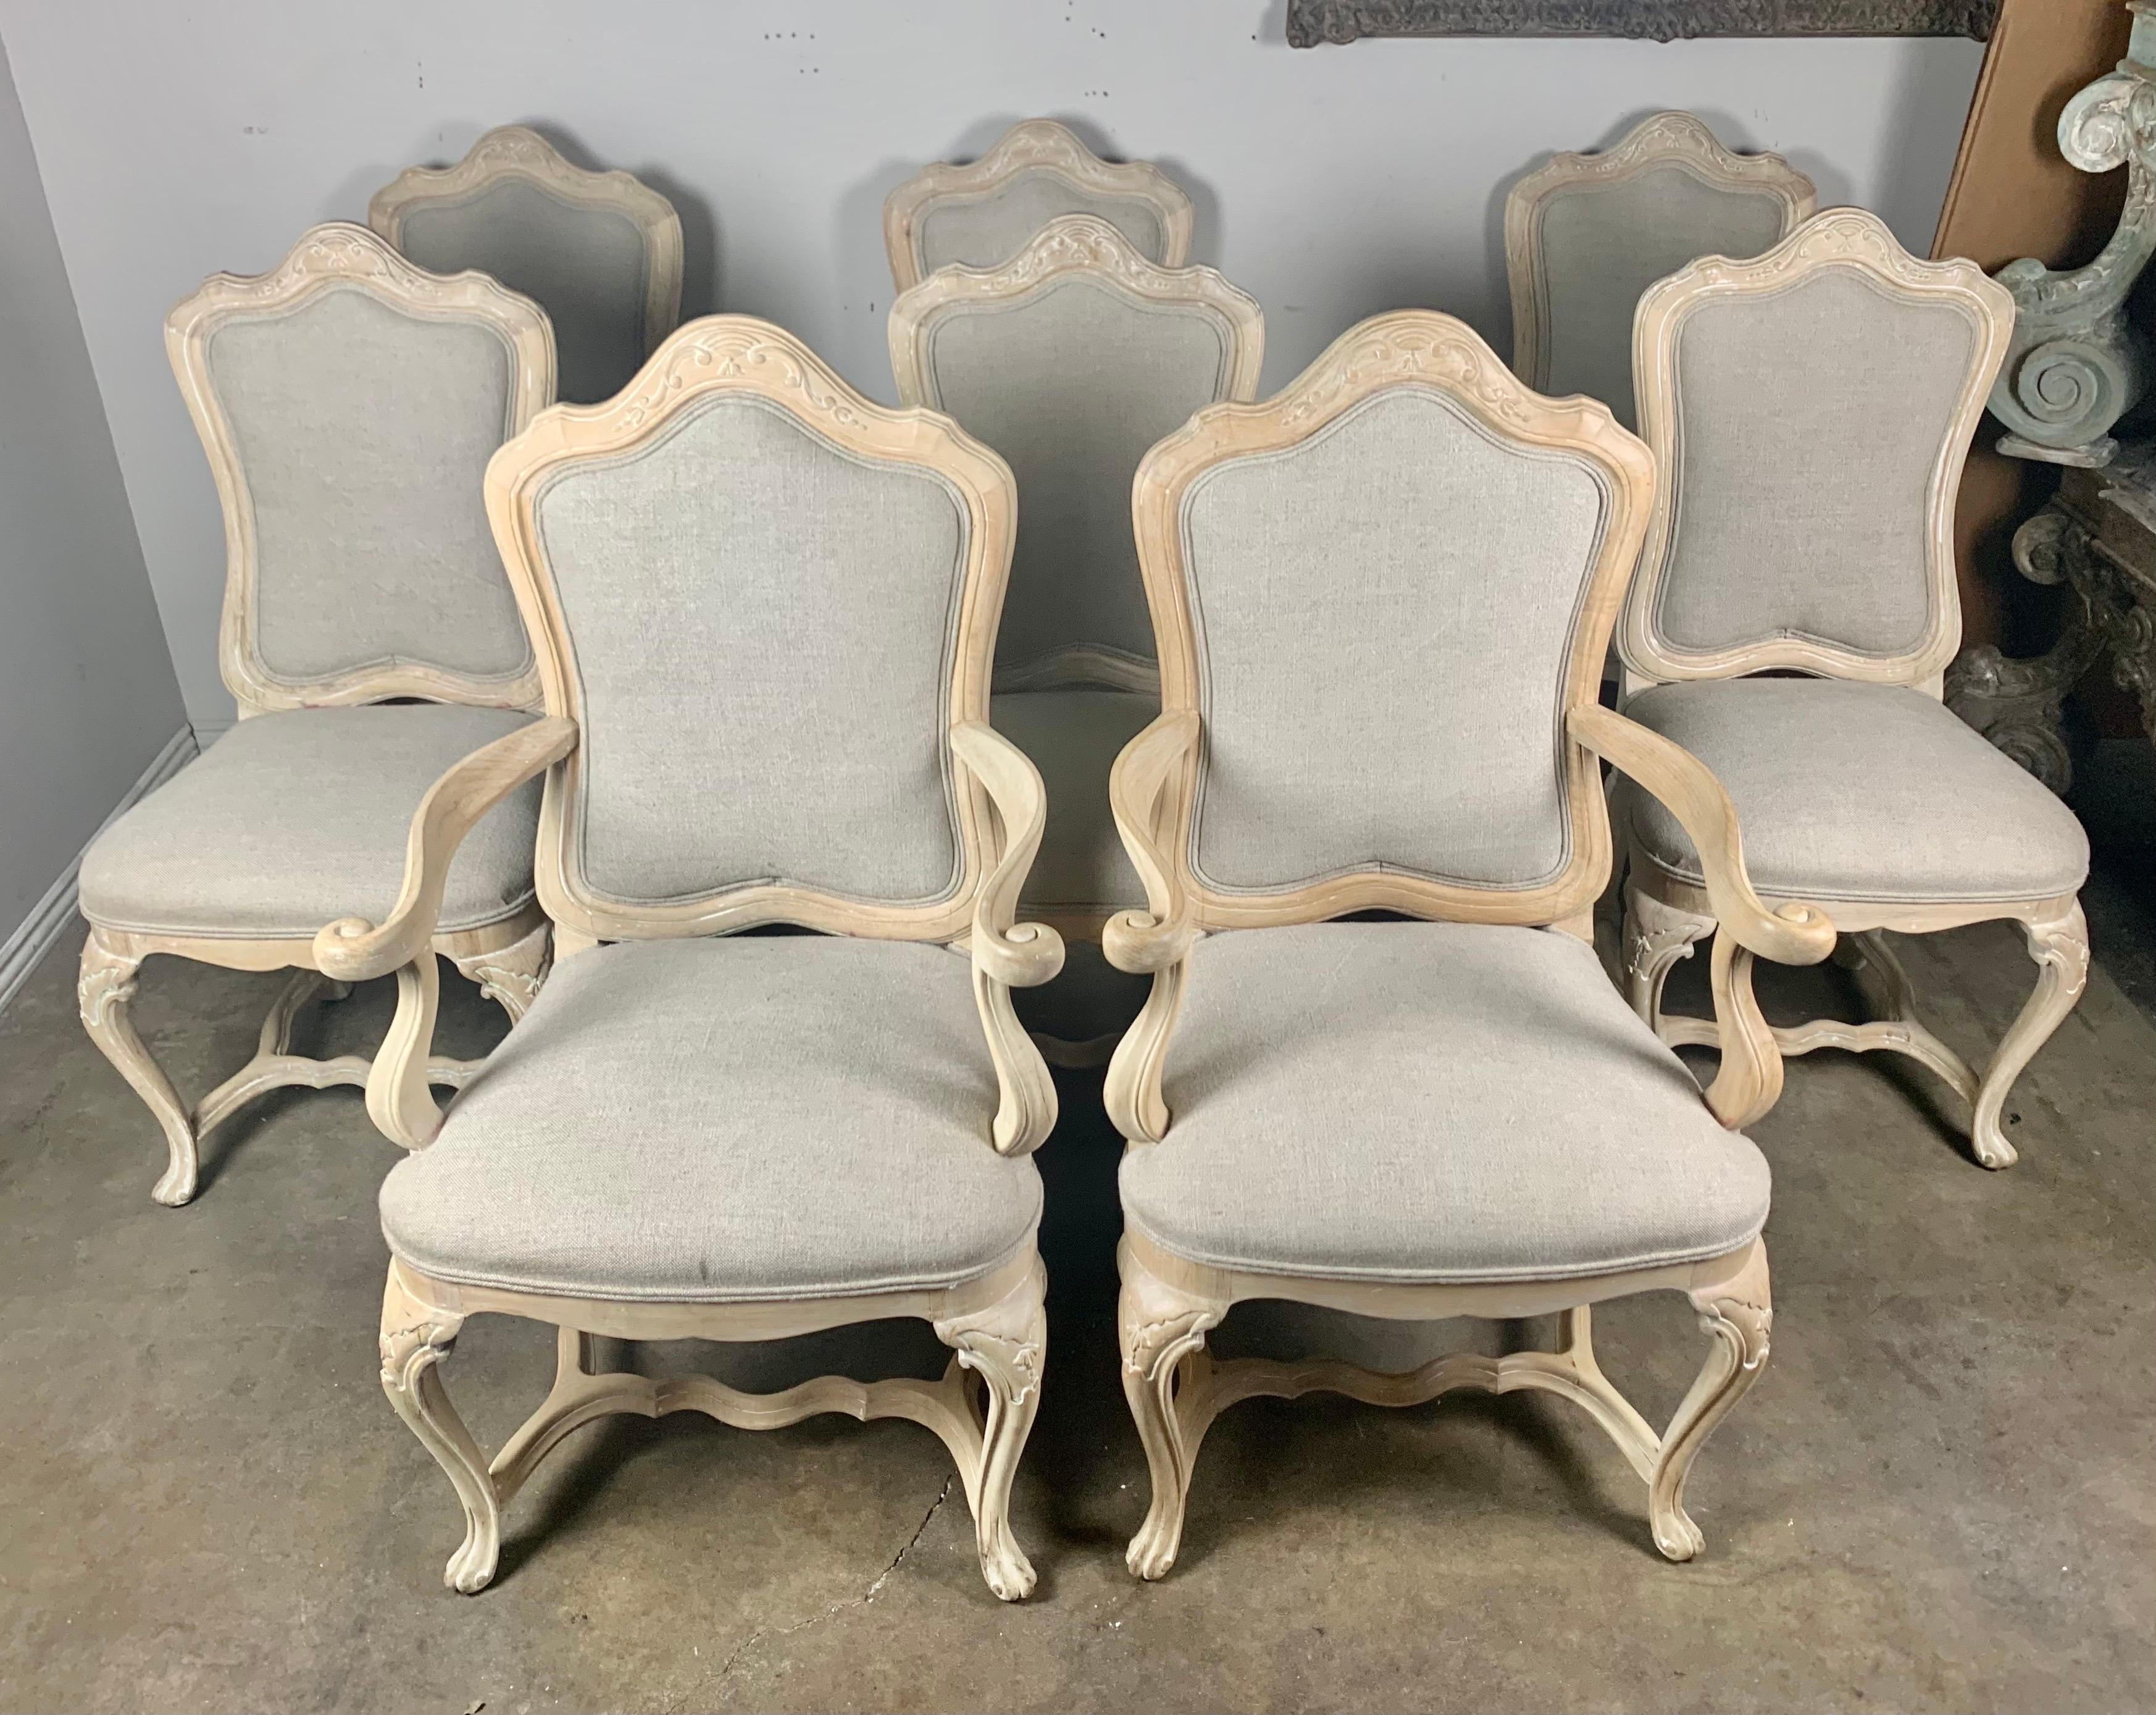 Set of eight bleached walnut French carved wood dining chairs. The chairs stand on cabriole legs and are connected by a bottom stretcher. The chairs are newly reupholstered in a washed Belgium linen with nailhead trim detail.

Size of armchairs: